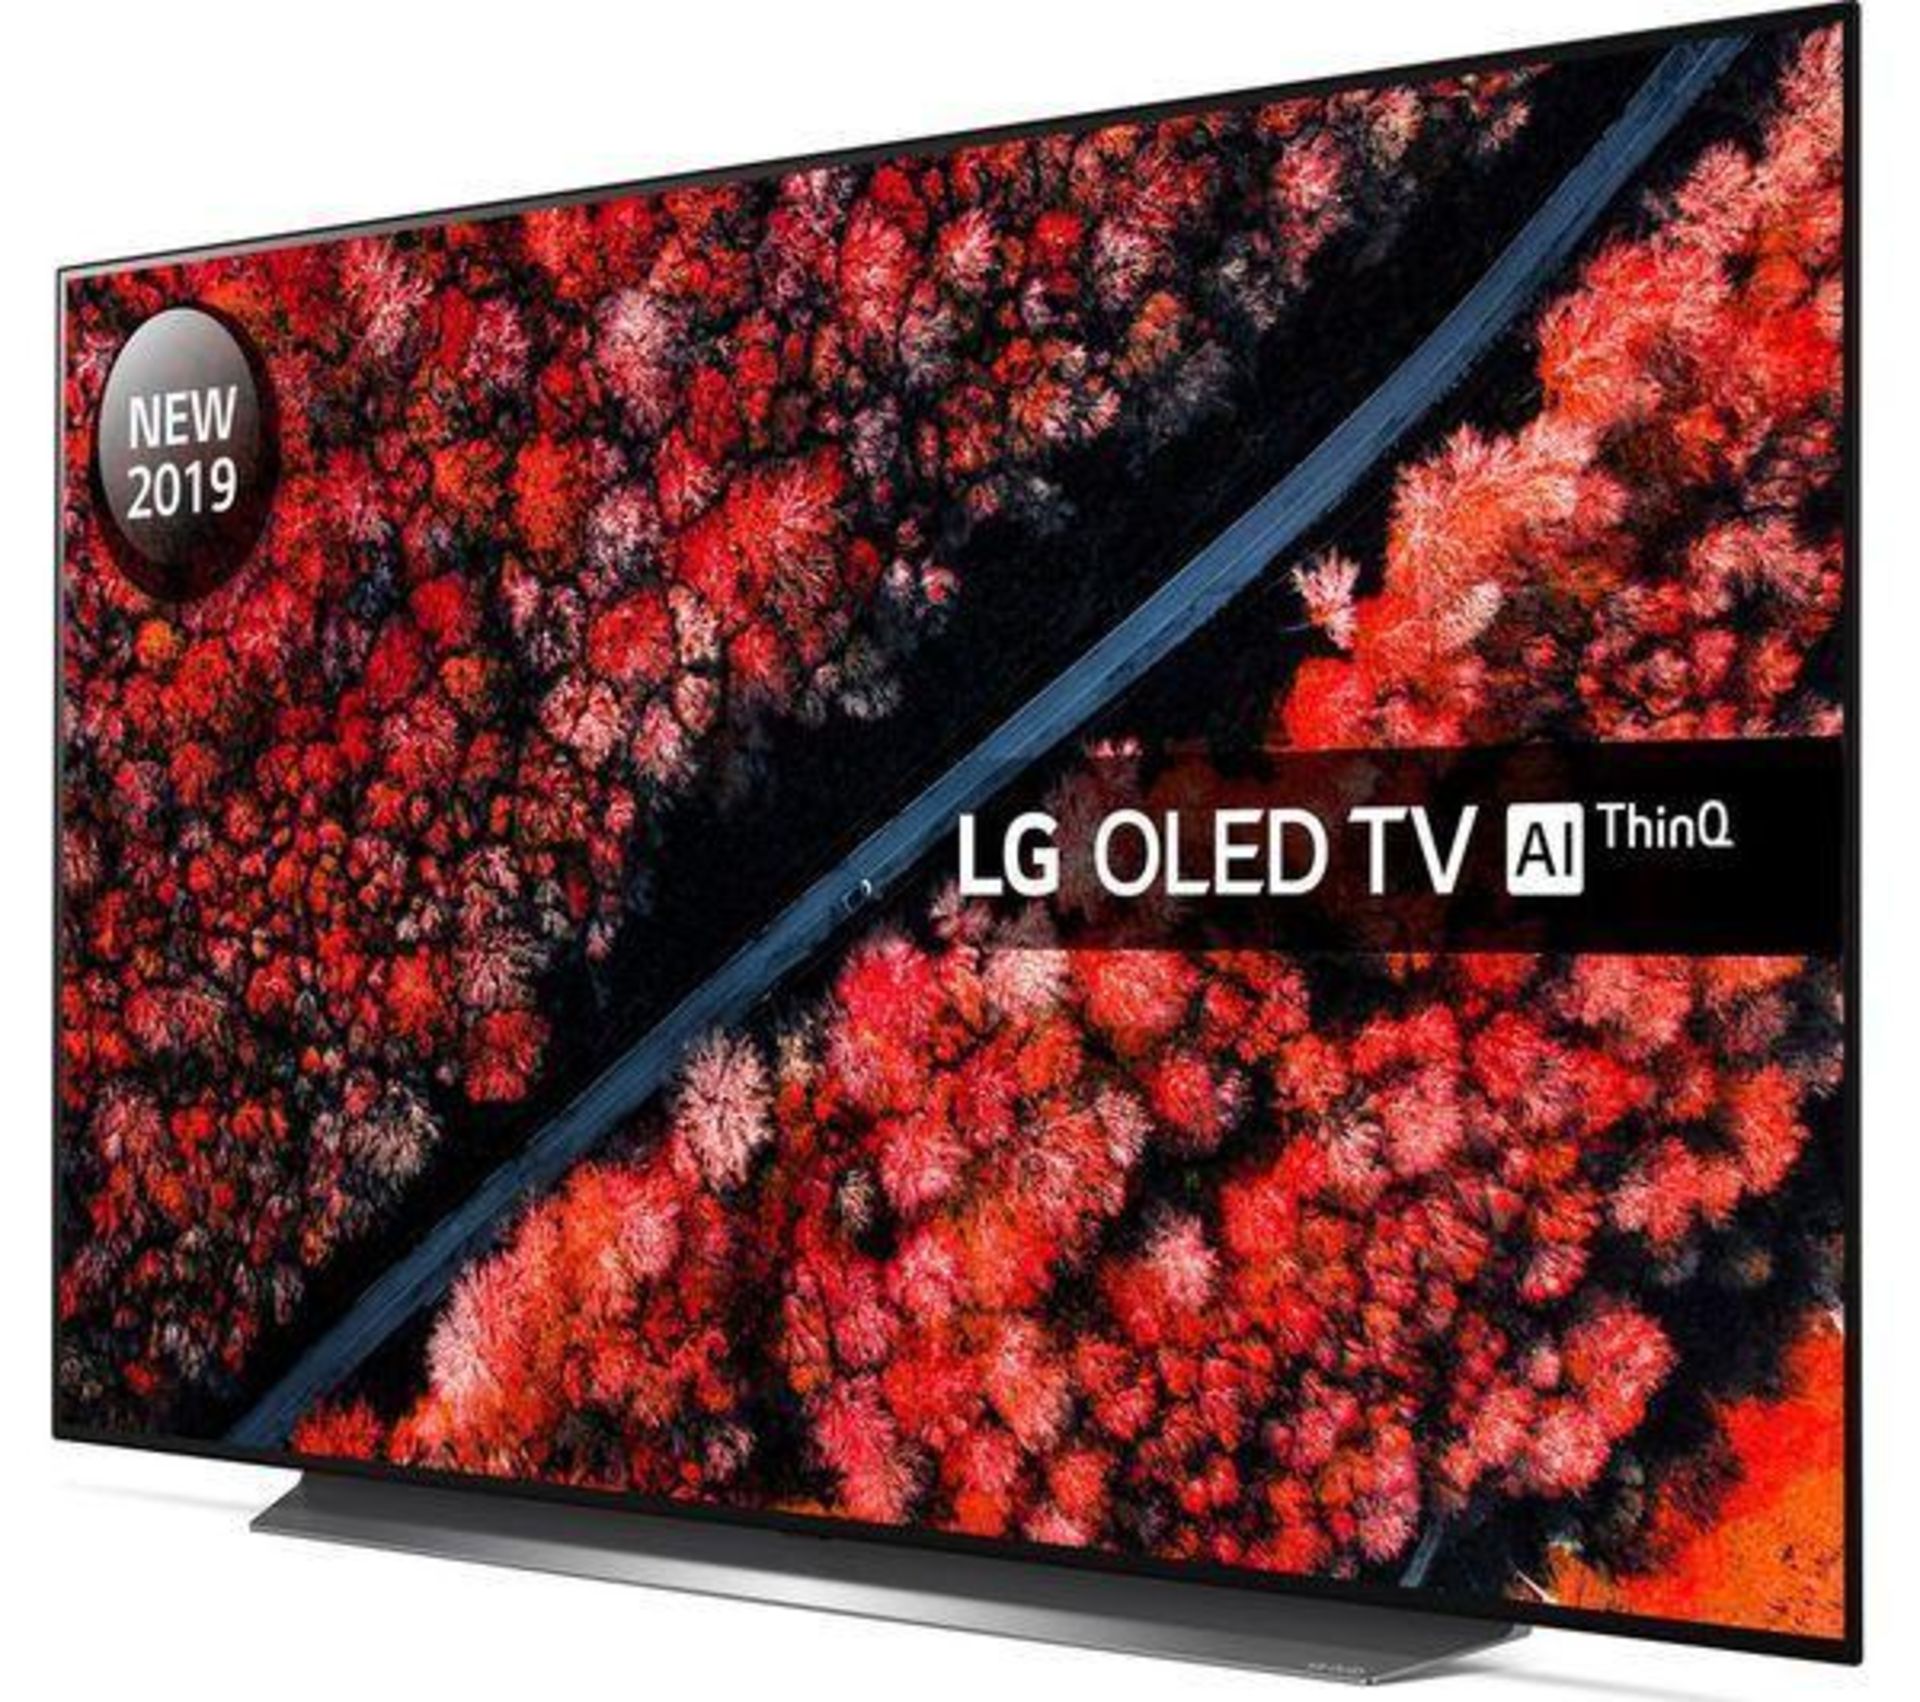 LG OLED65C9MLB 65" Smart 4K Ultra HD HDR OLED TV with Google Assistant. RRP £499.99. Our experts - Bild 2 aus 3